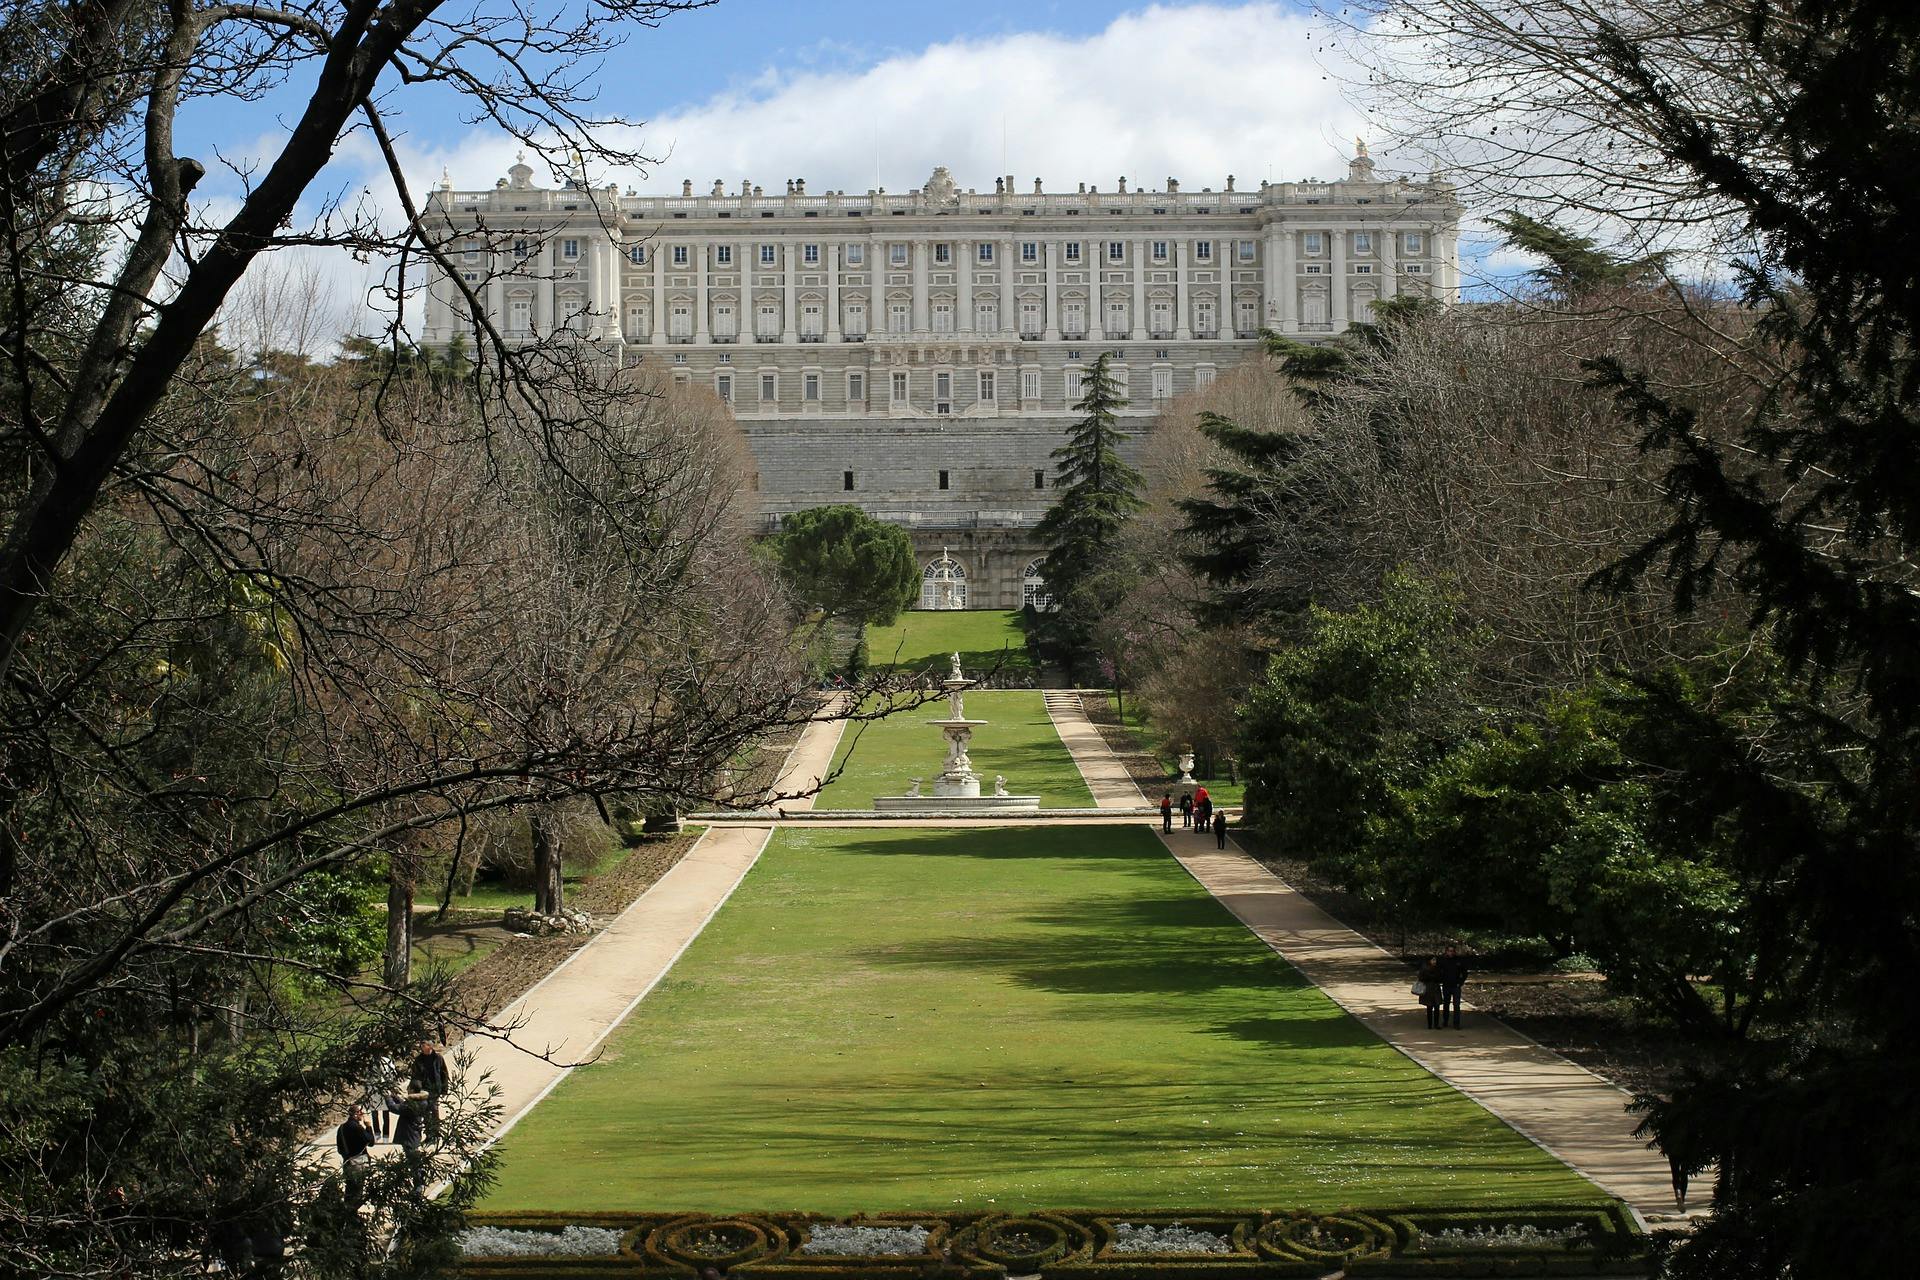 Madrid Royal Palace skip-the-line tickets and tour with an expert guide-3